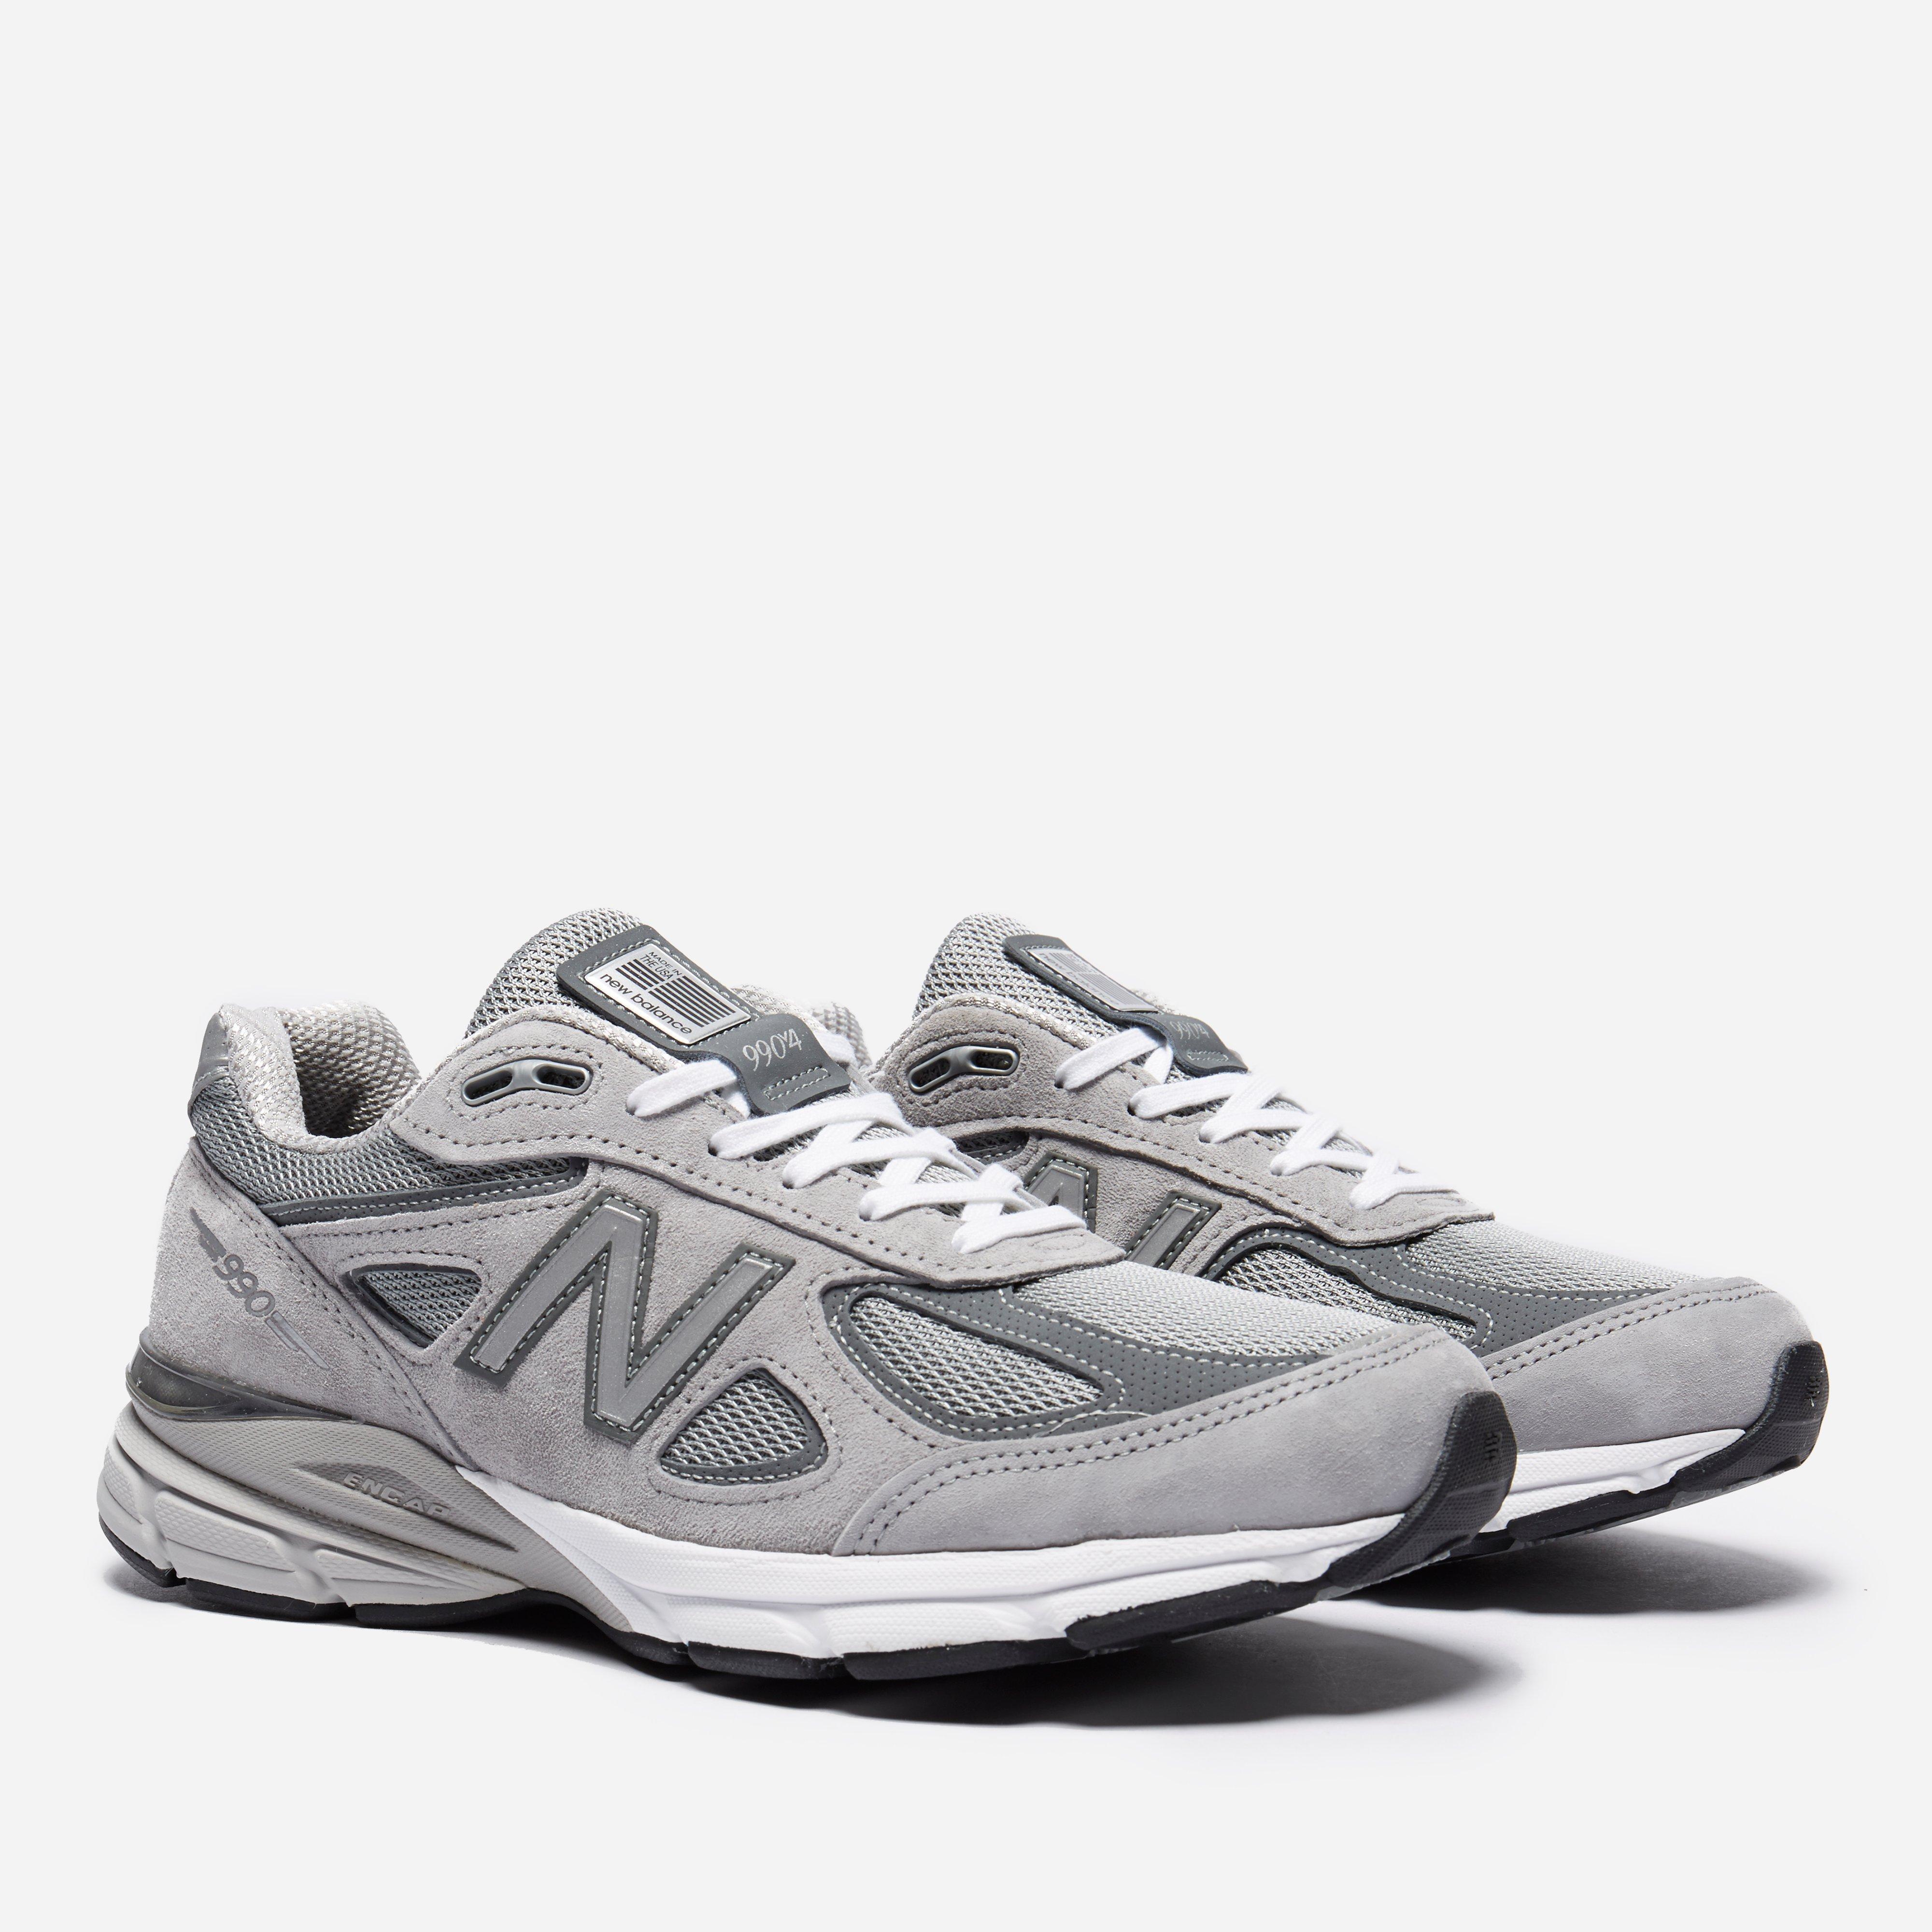 New Balance Suede M990gl5 - Made In The Usa in Grey (Gray) for Men - Lyst